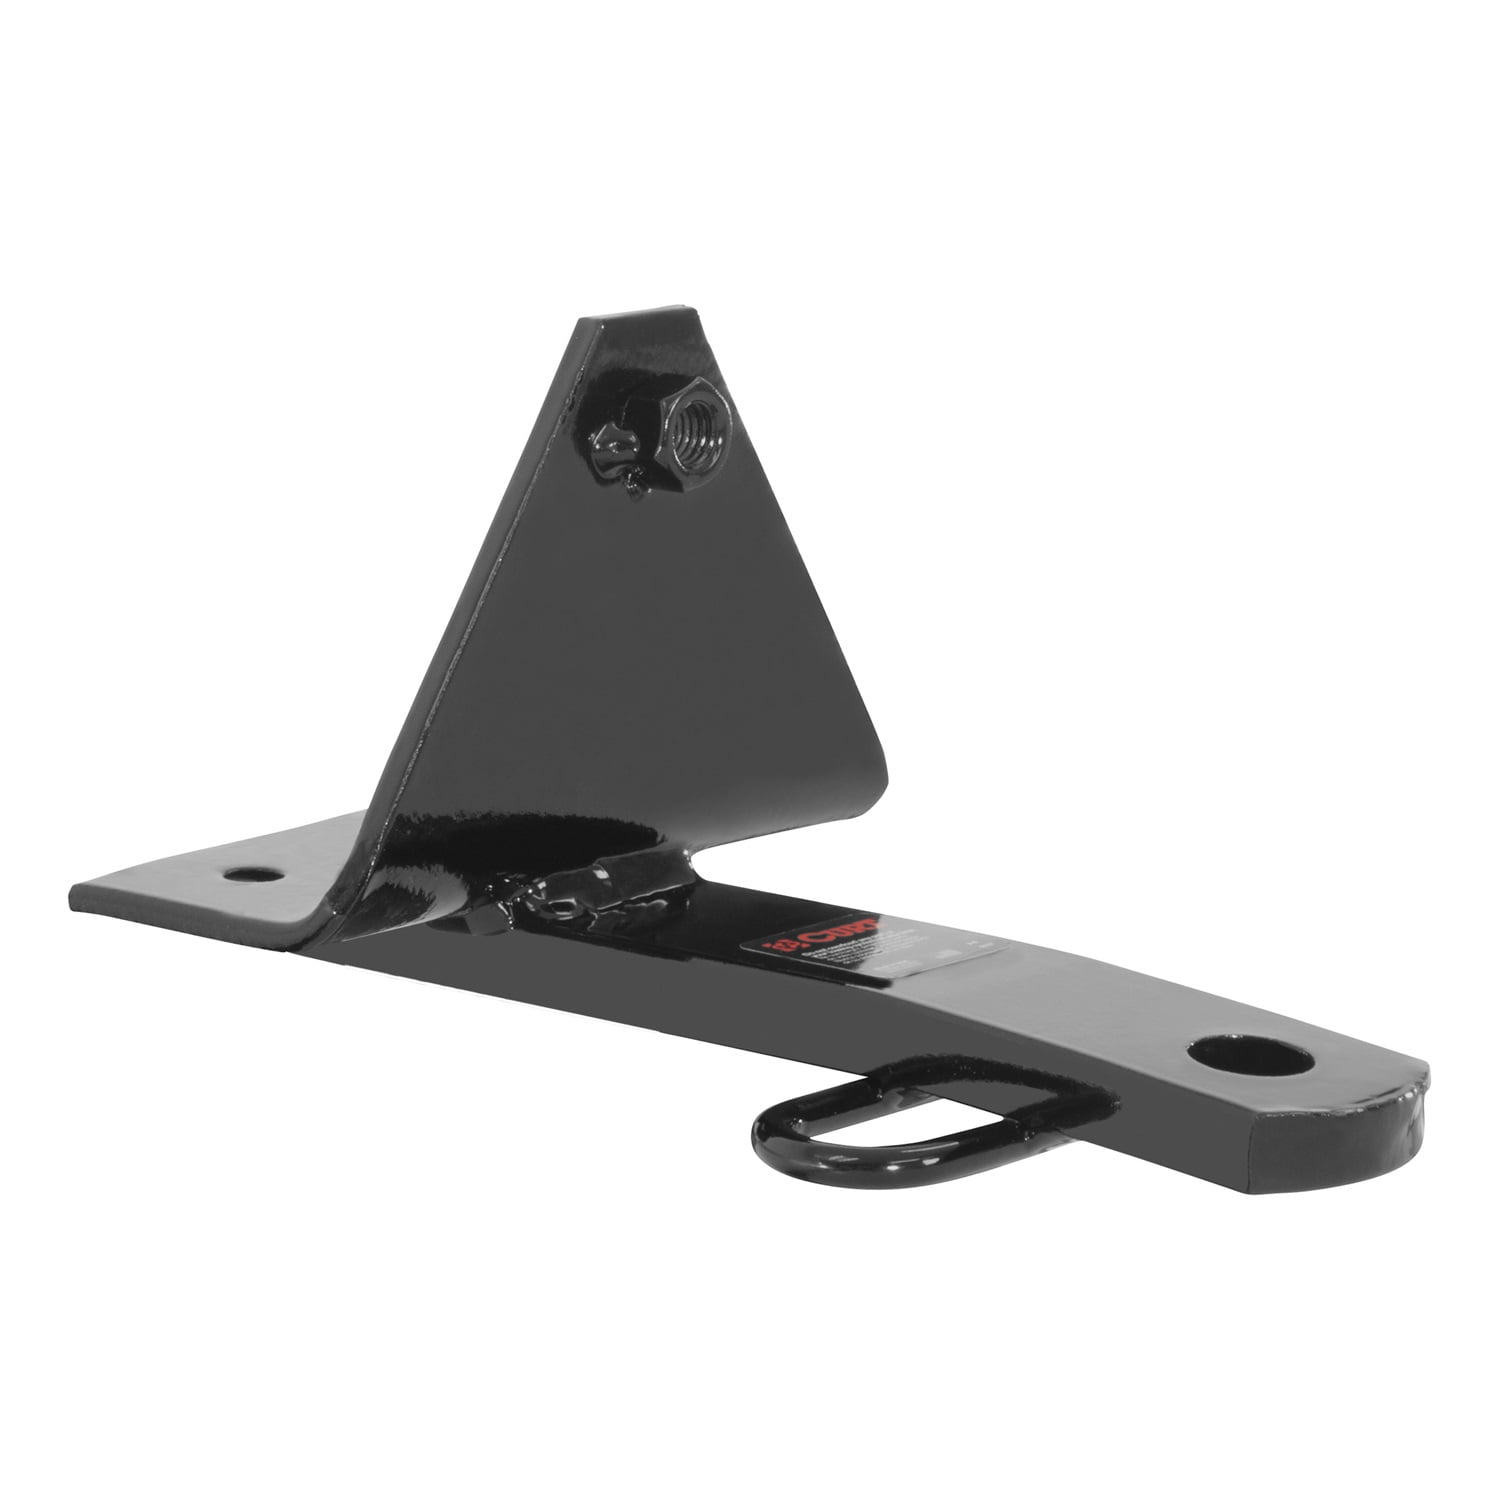 CURT Class 1 Trailer Hitch, includes installation hardware